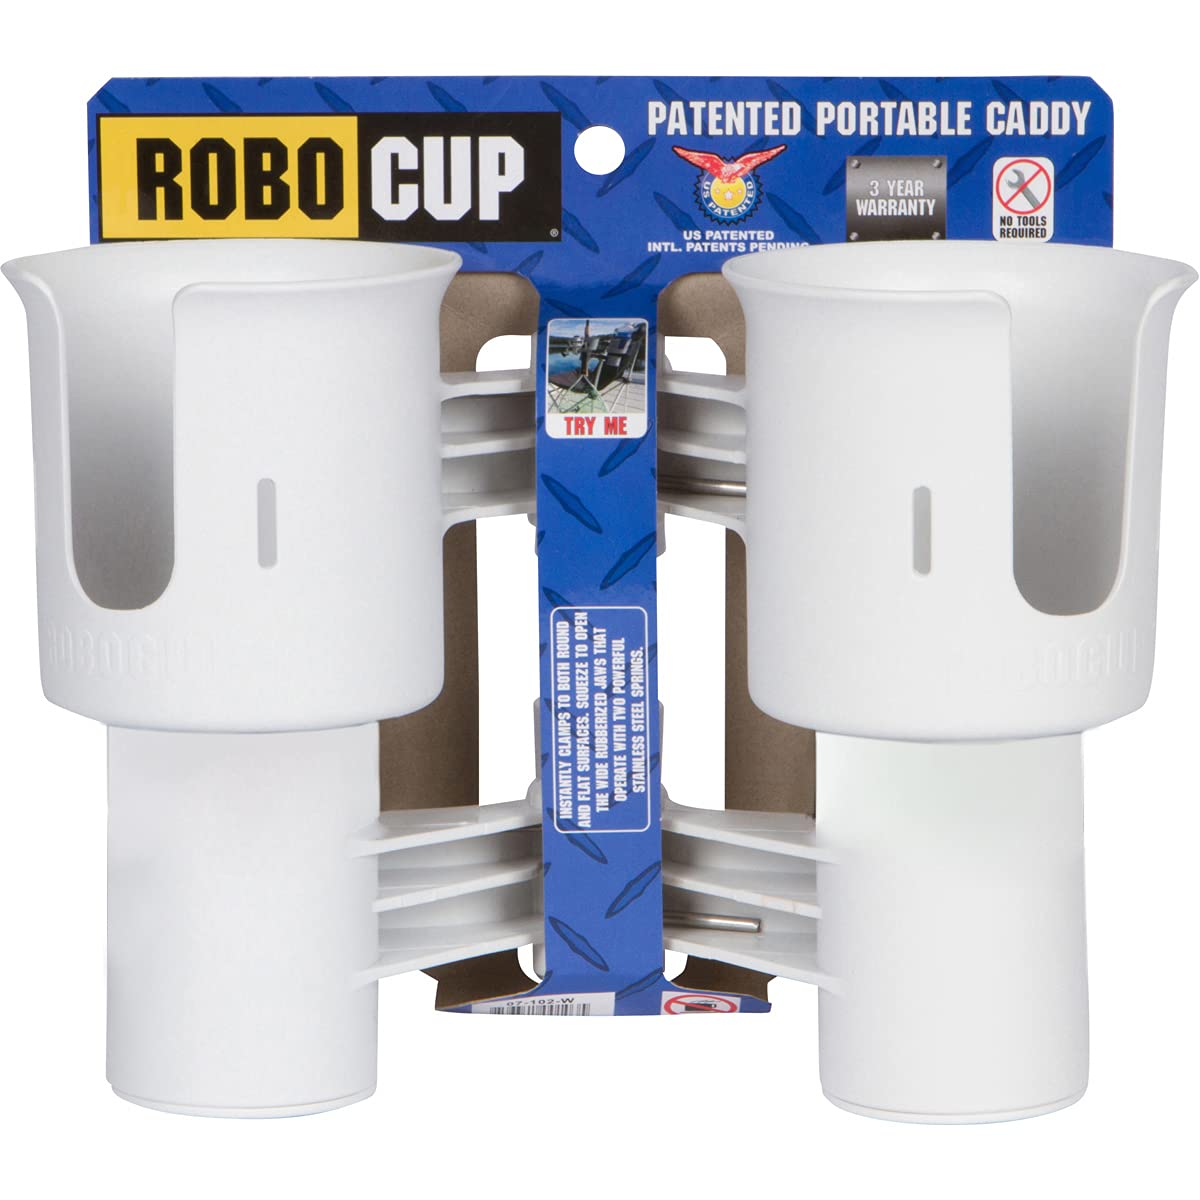 ROBOCUP 12 Colors, Best Cup Holder for Drinks, Fishing Rod/Pole, Boat, Beach Chair, Golf Cart, Wheelchair, Walker, Drum Sticks, Microphone Stand